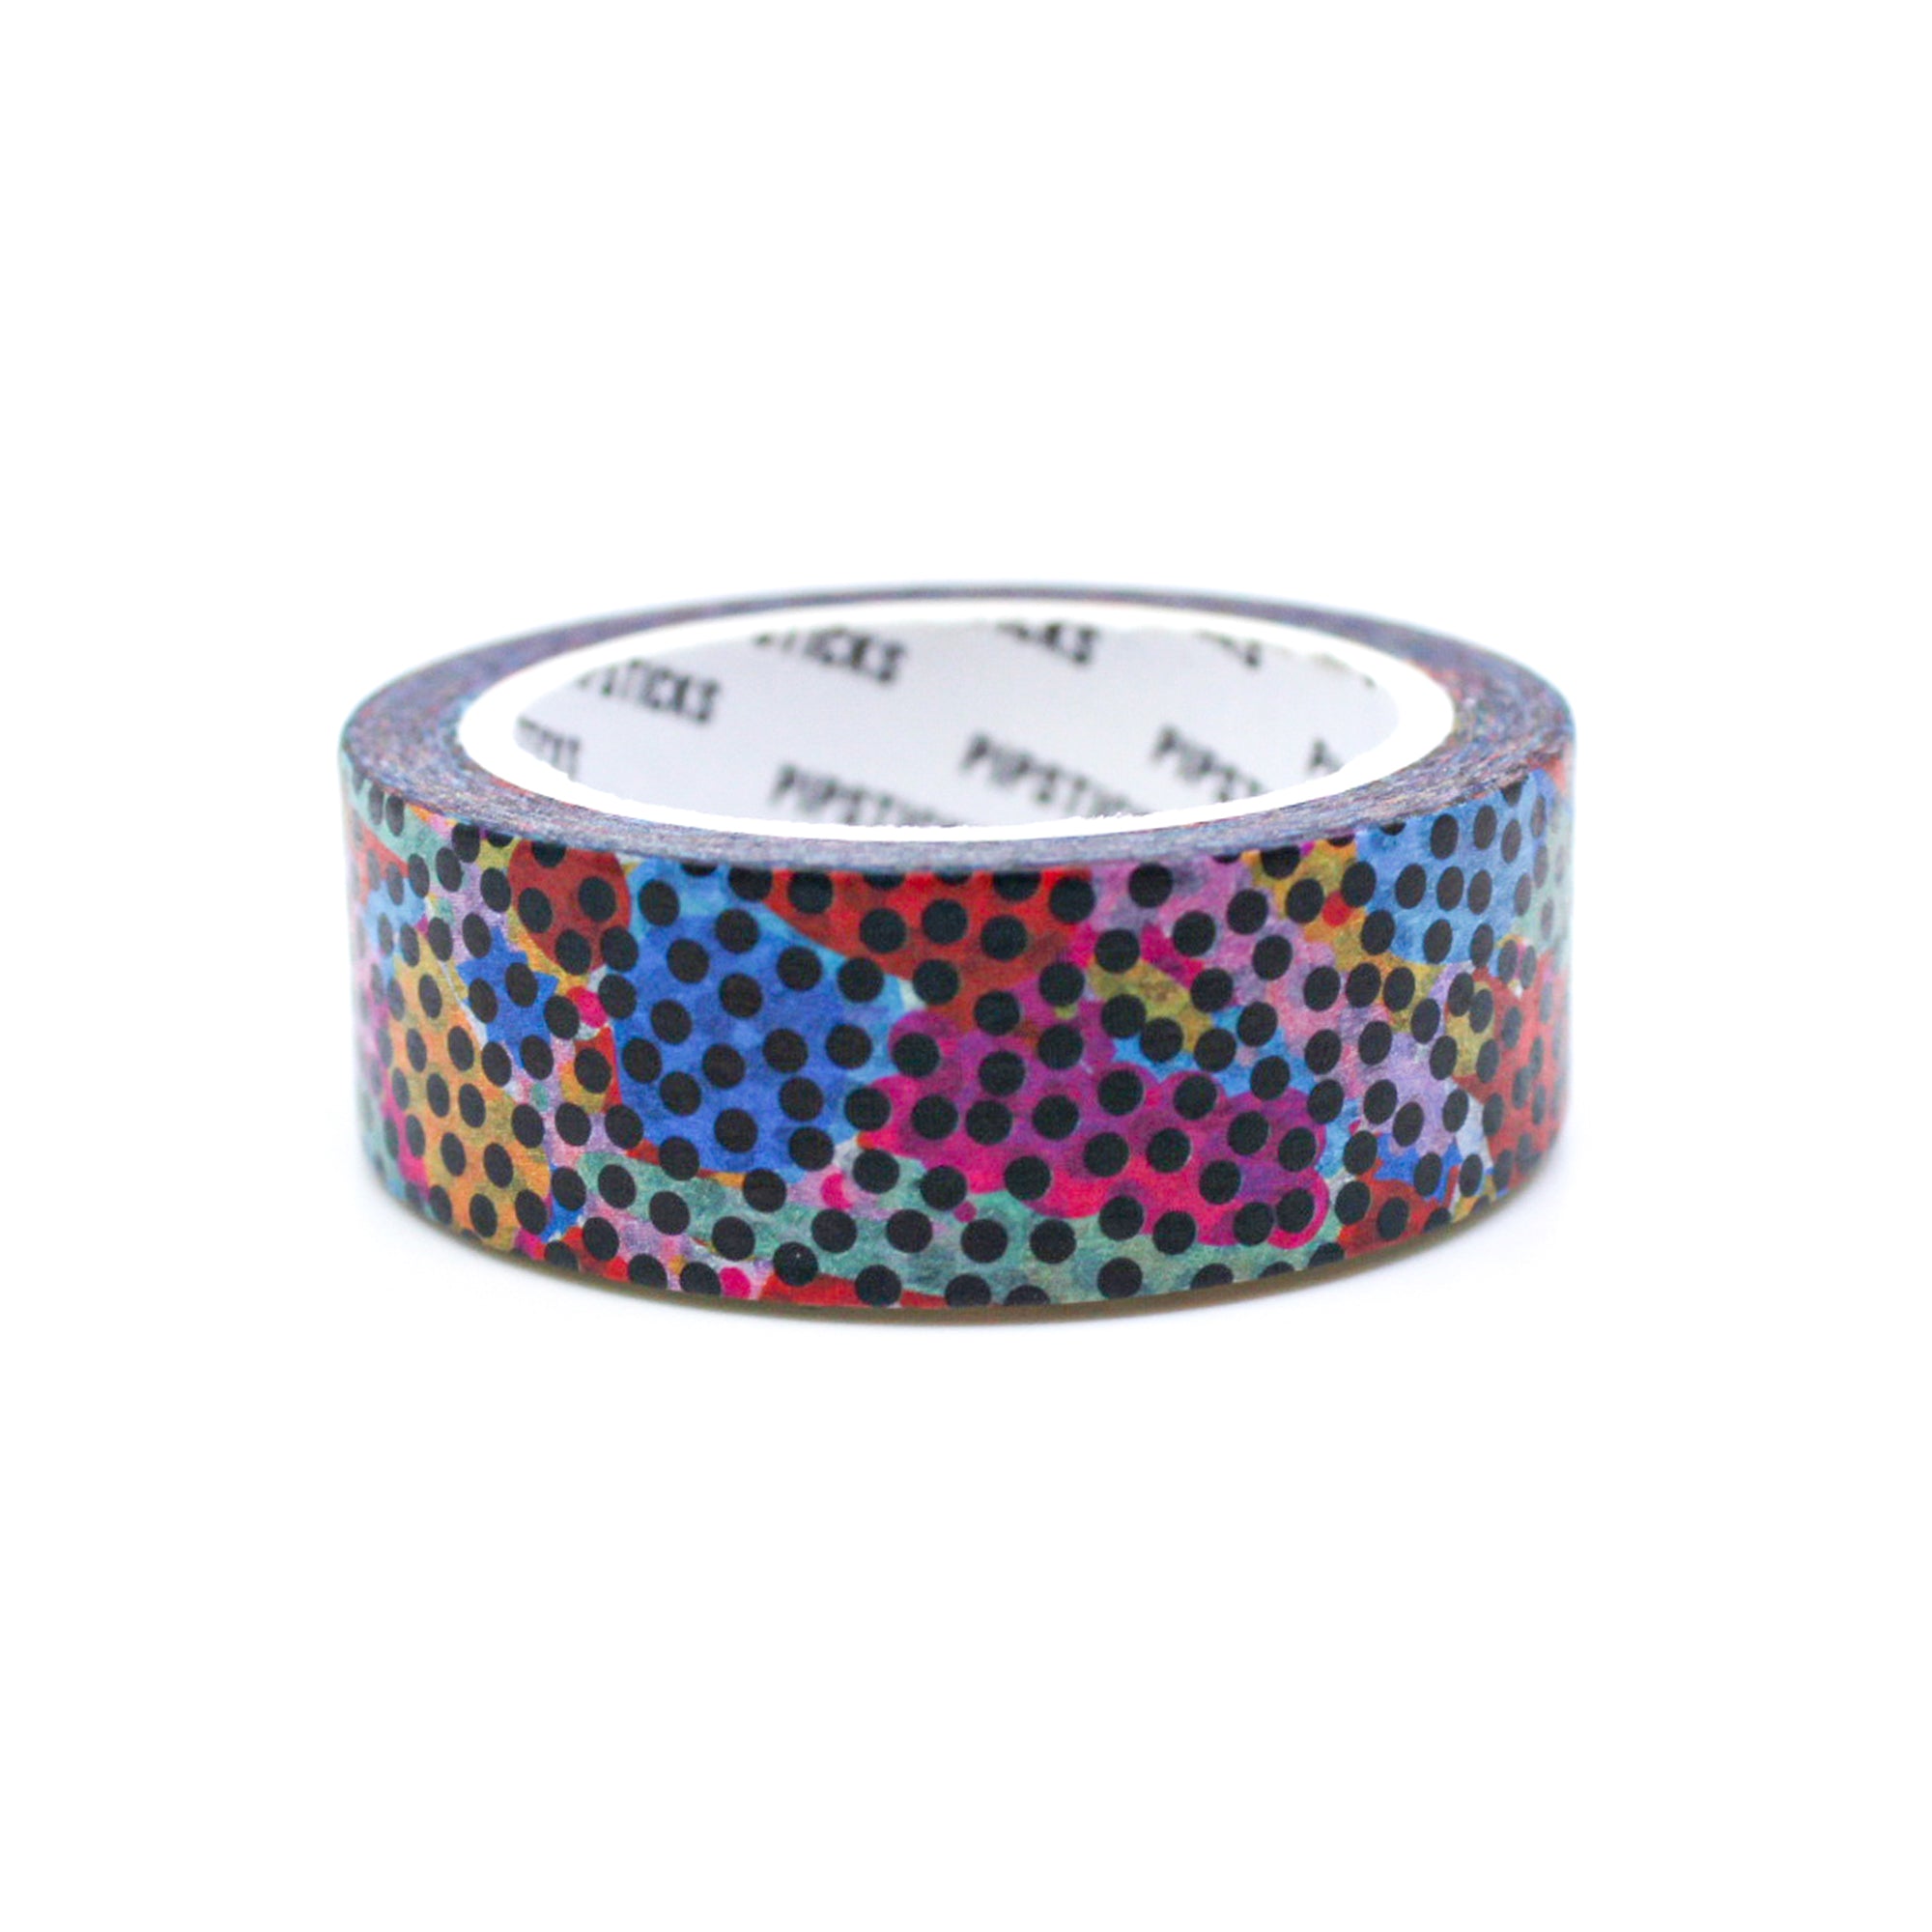 This Spot in the Dark Washi Tape is a funky and eclectic tape that brings a playful burst of color to your crafting projects.  This tape is designed by Pipsticks and sold at BBB Supplies Craft Shop.